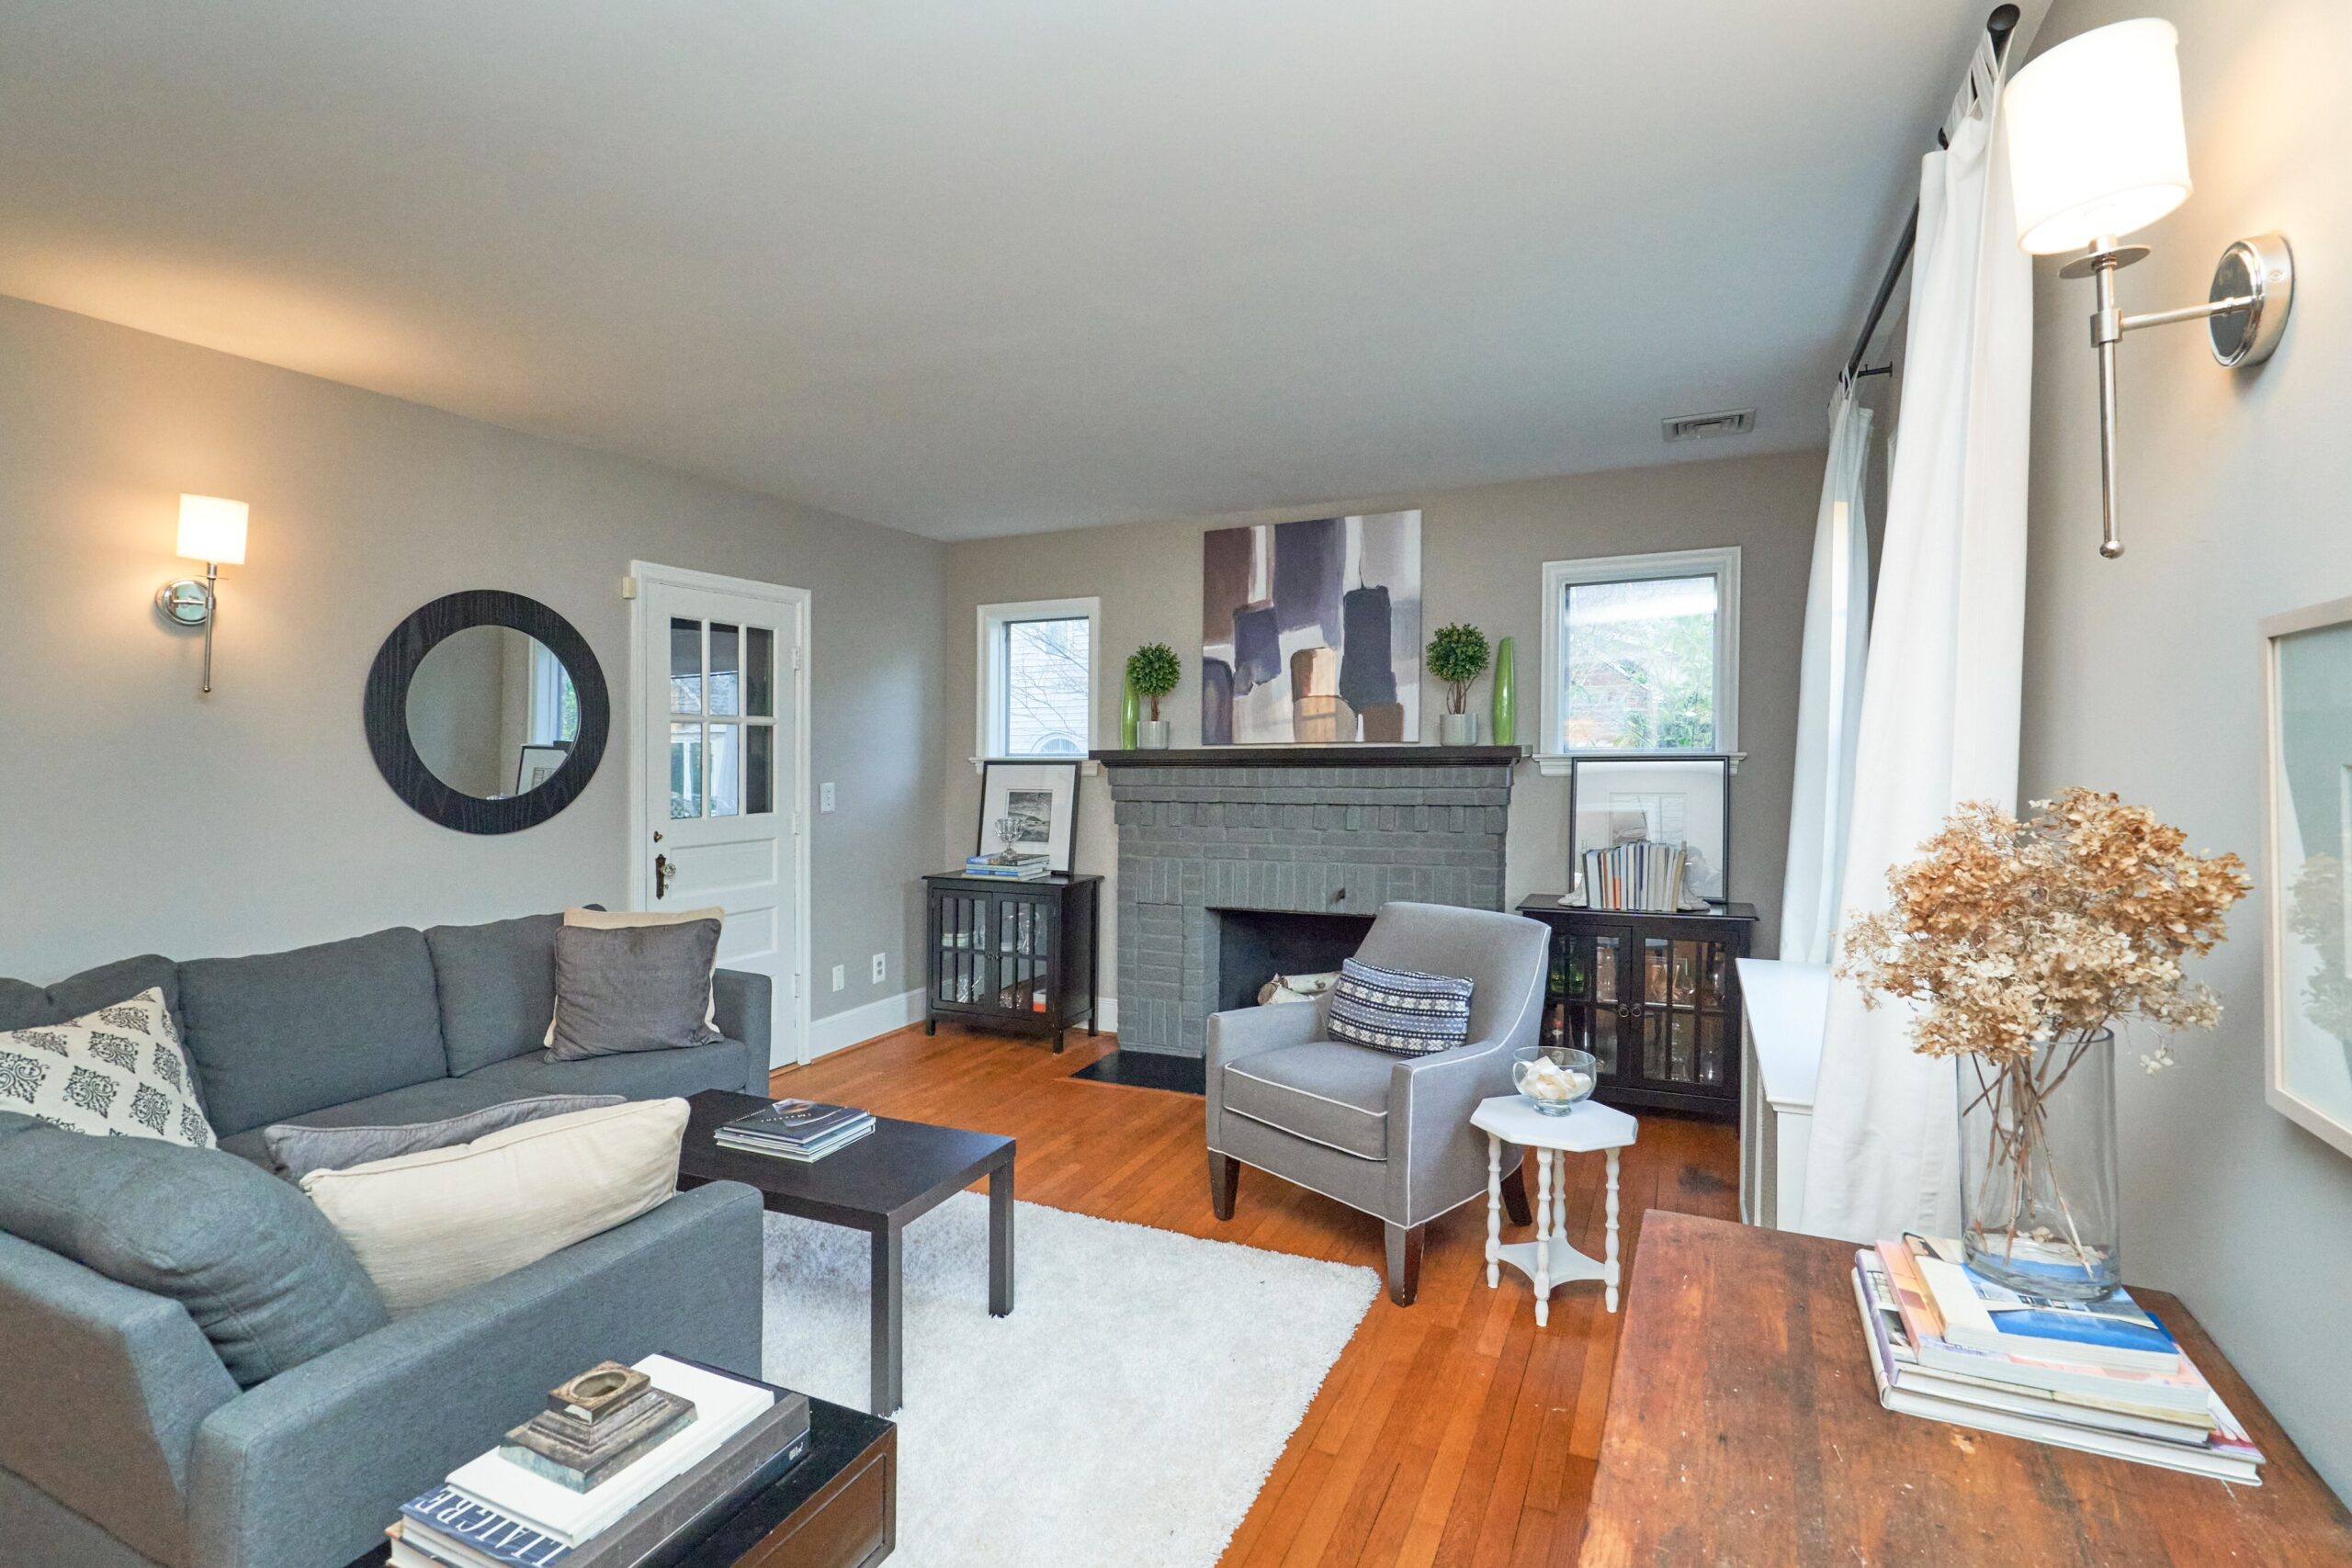 Professional interior photo of 5933 16th St N, Arlington, VA - showing the front living room with grey painted brick fireplace and hardwood floors